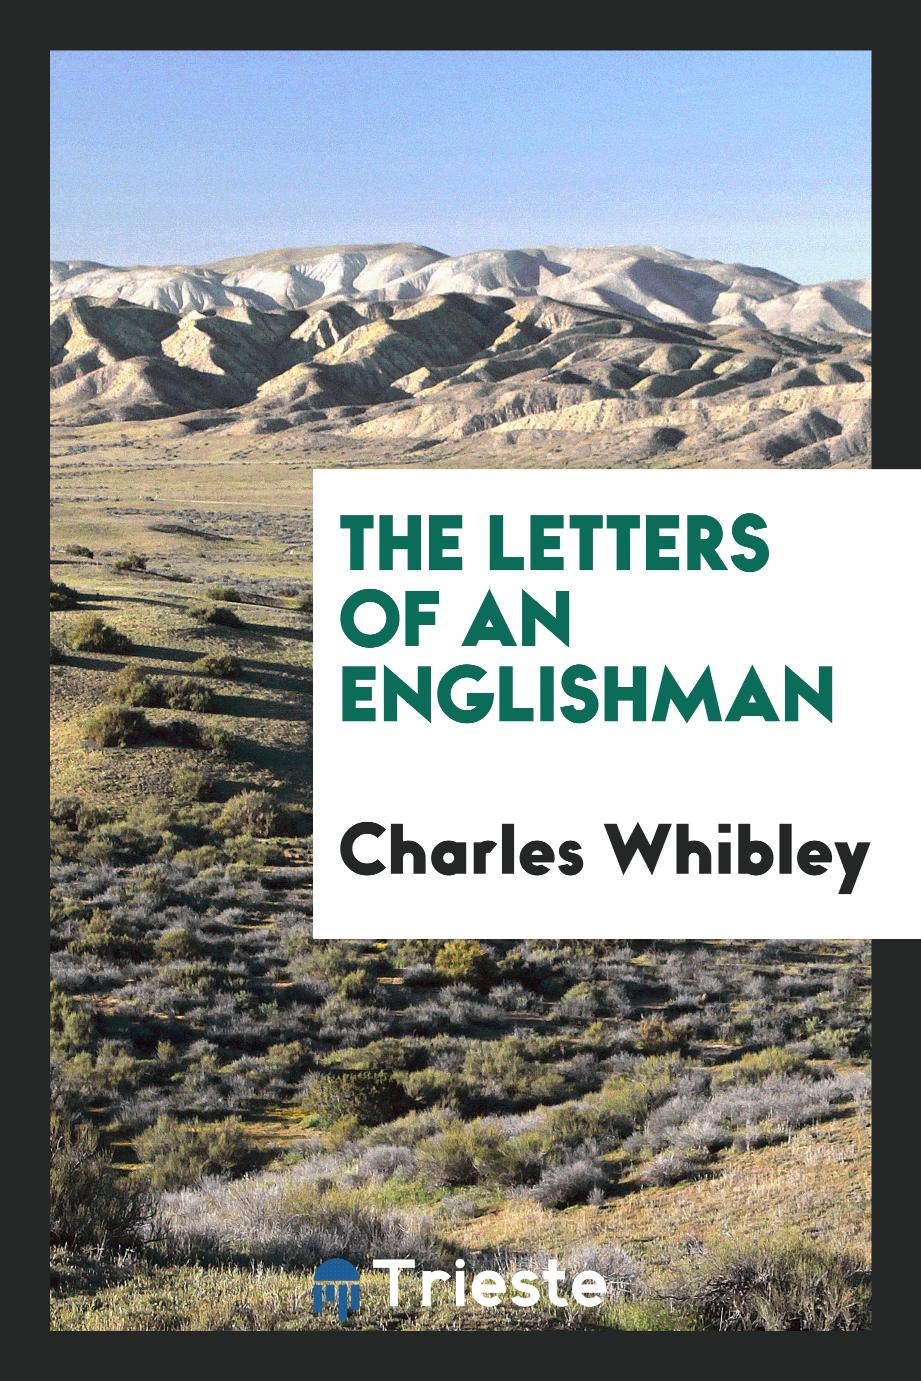 The letters of an Englishman